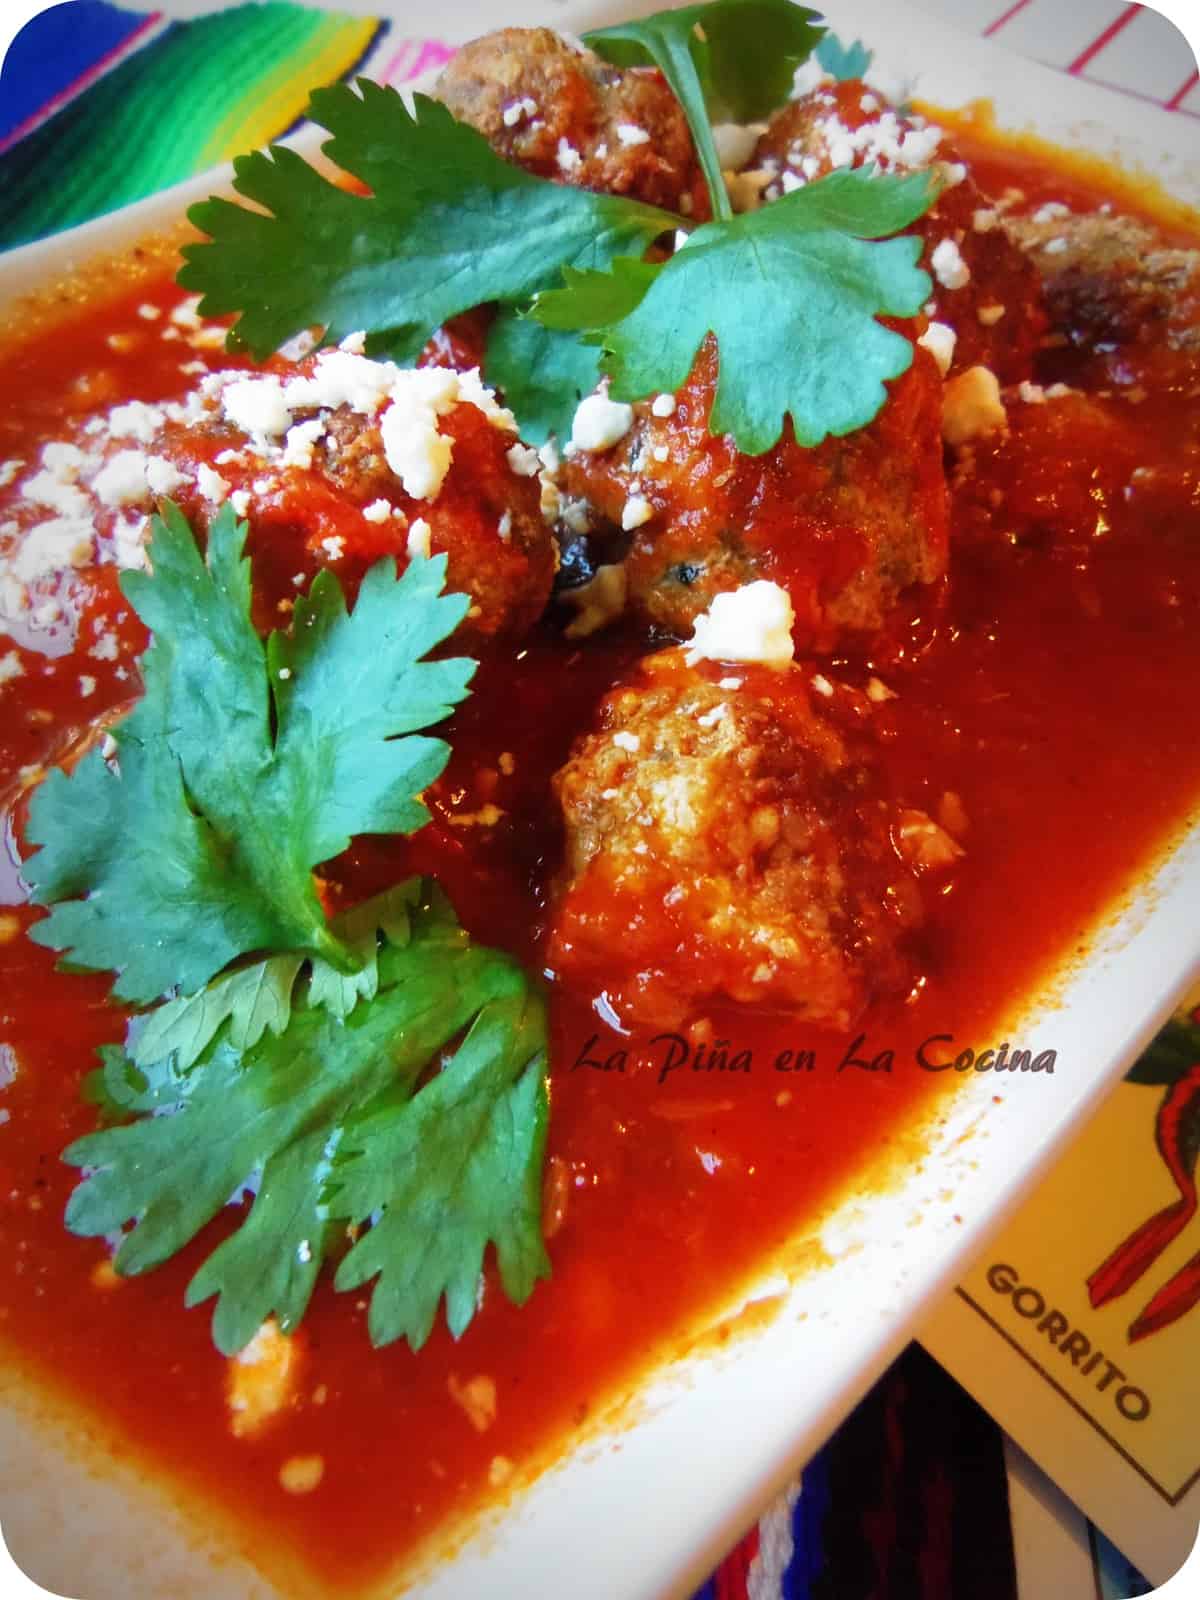 Tequila Spiked Meatballs in a Spicy Red Sauce